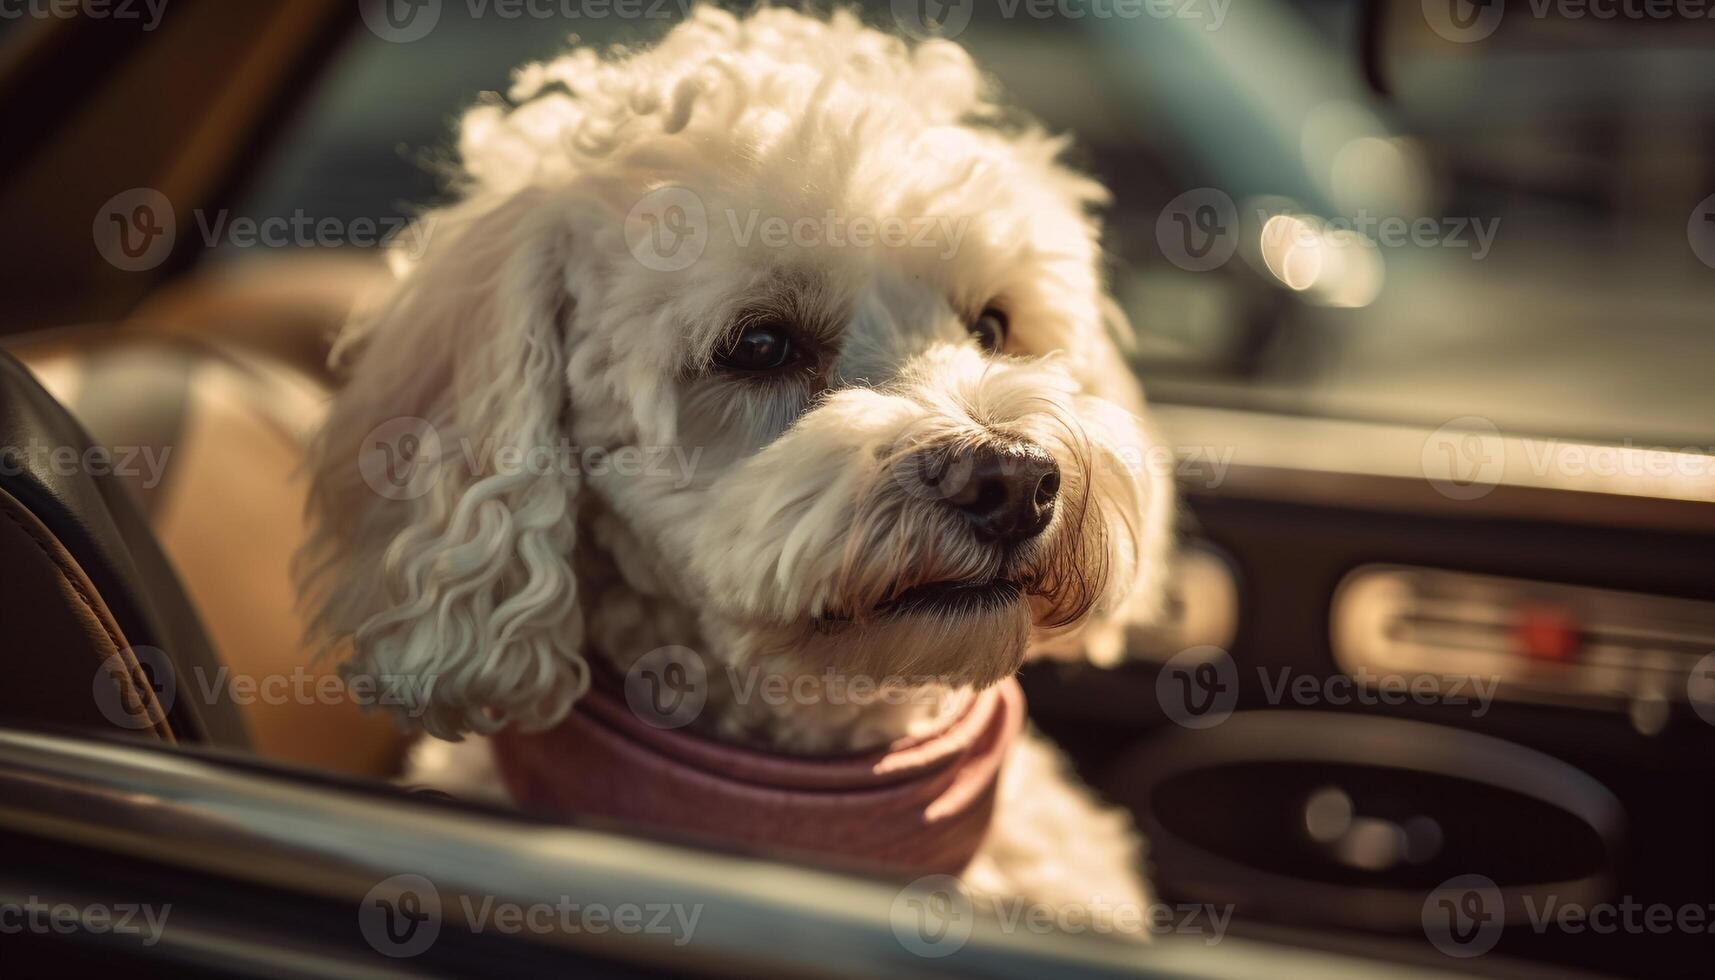 Cute purebred terrier sitting inside car, smiling generated by AI photo